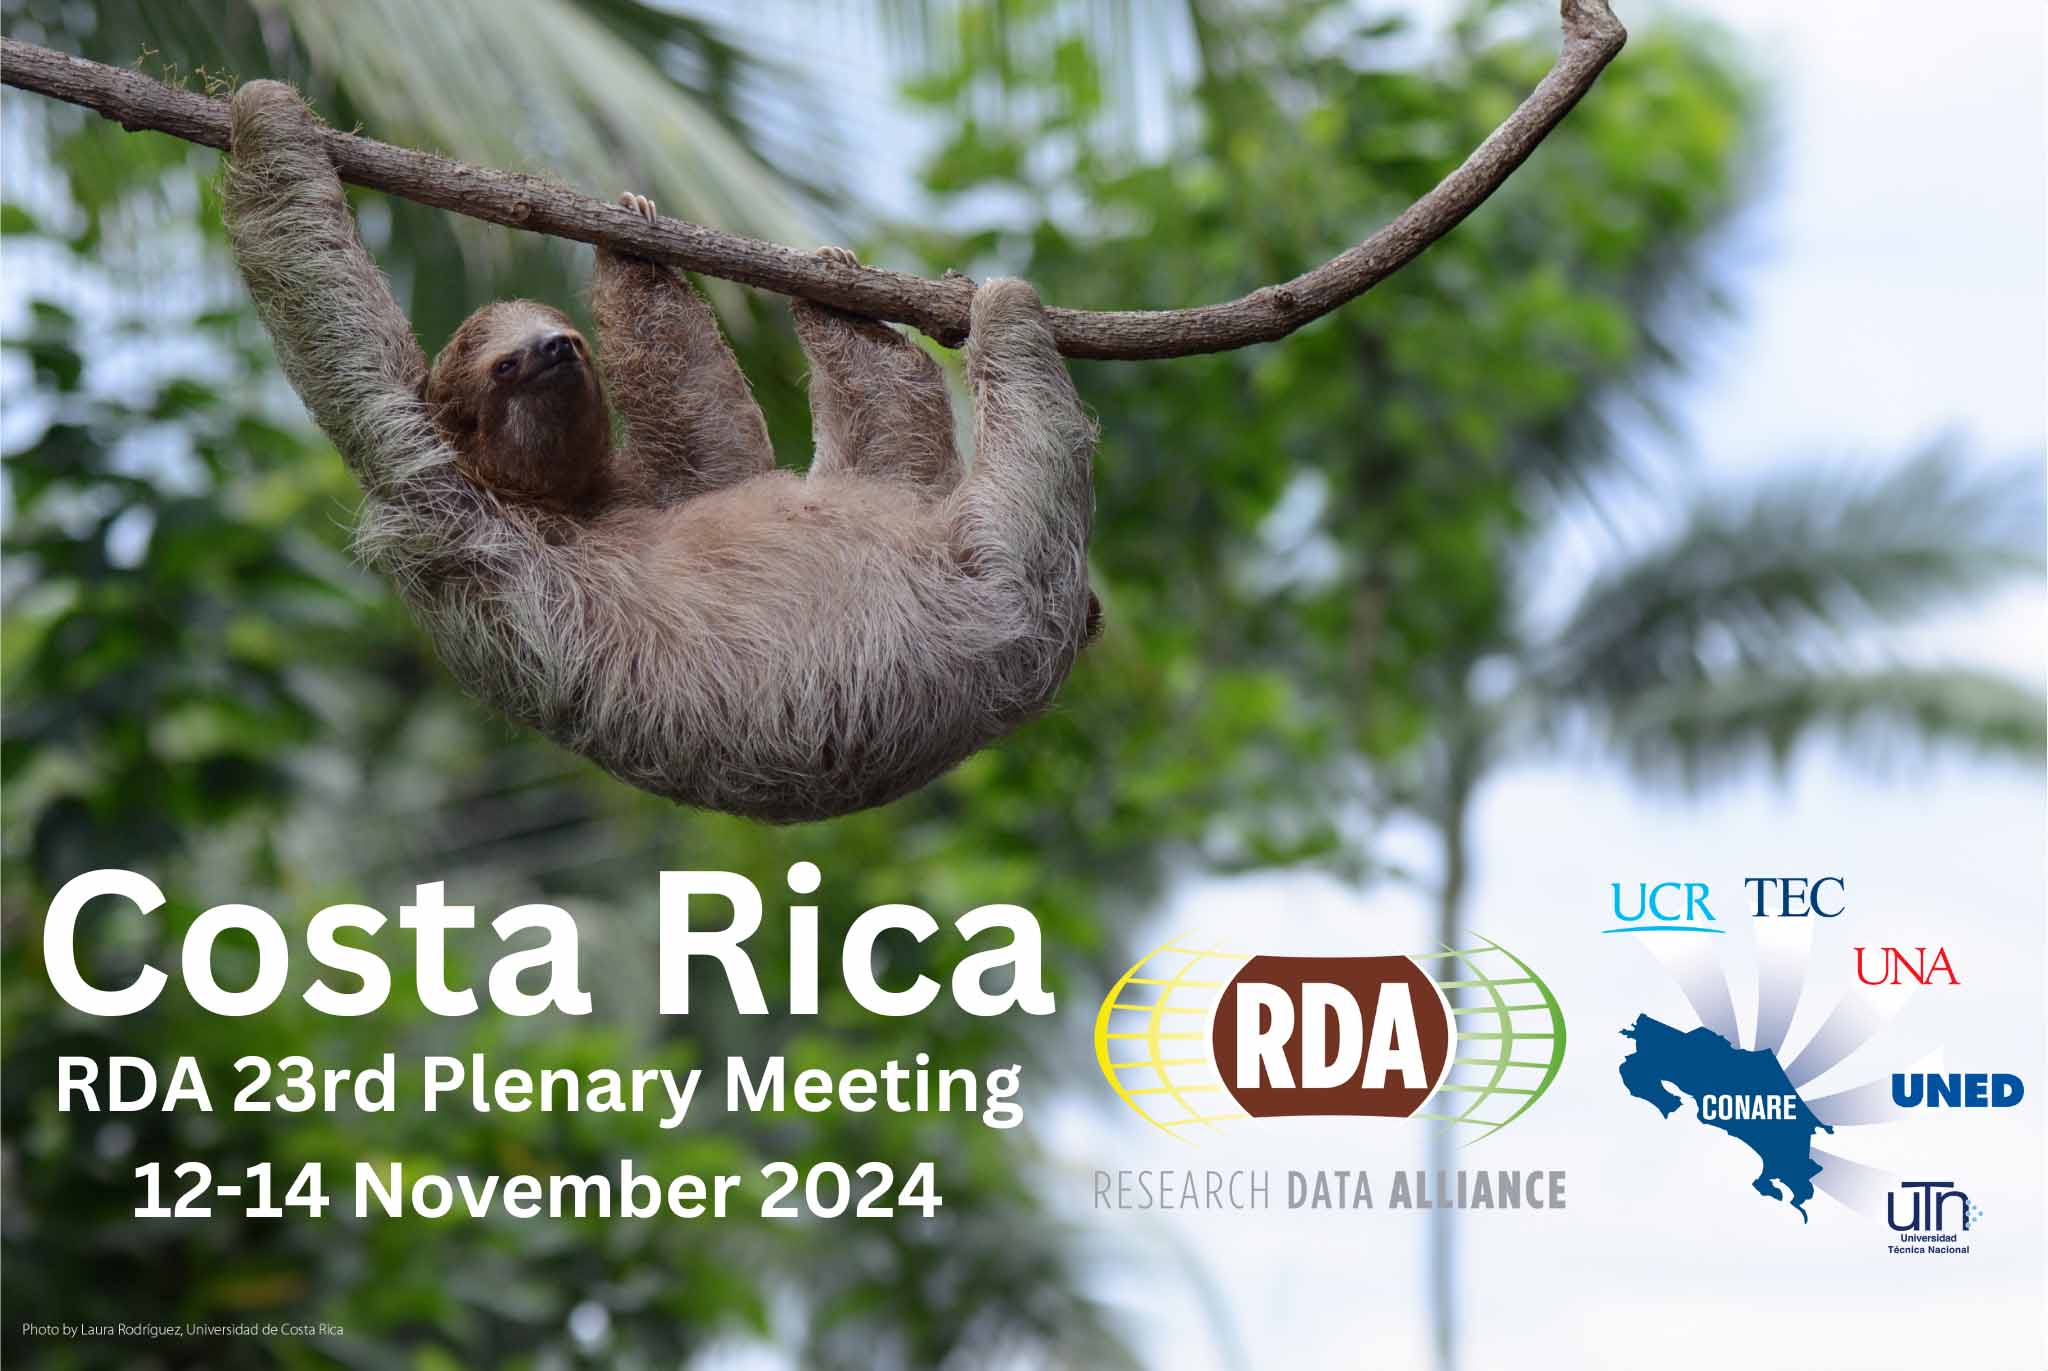 A image of a sloth to enhance the RDA 23rd Plenary meeting in Costa Rica